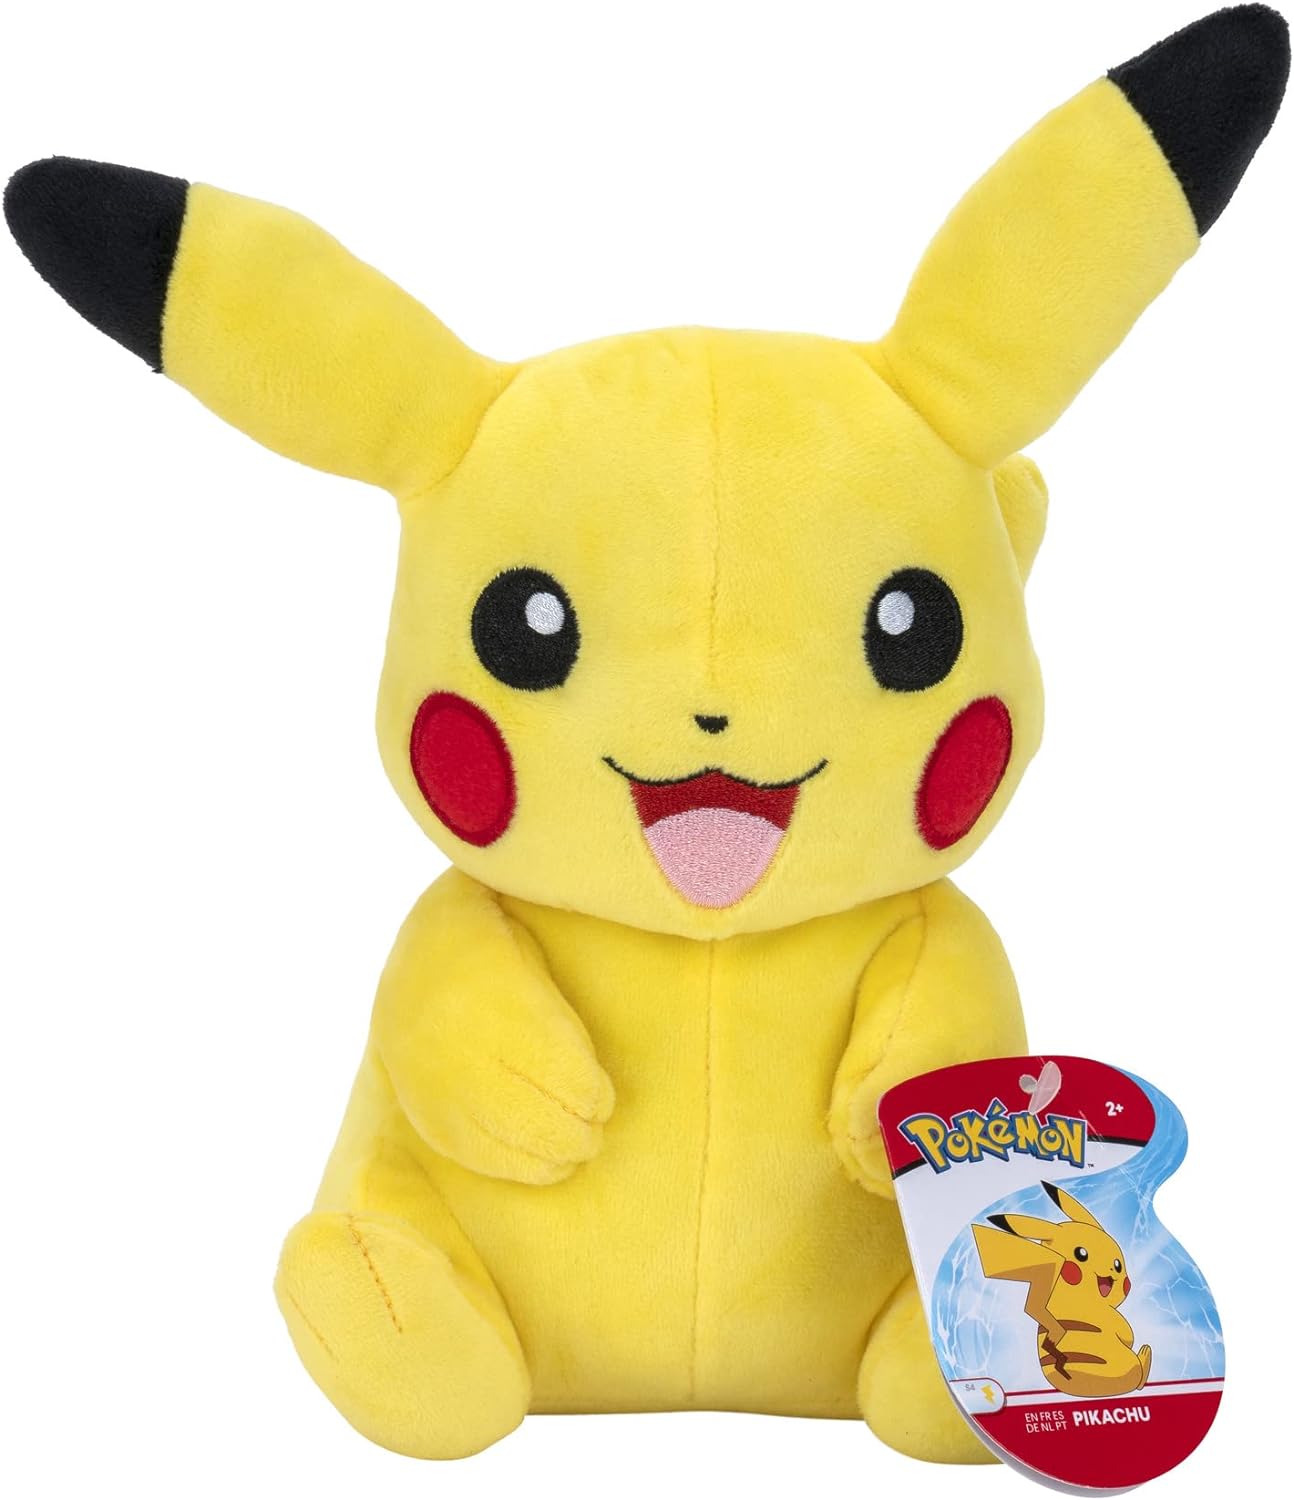 Pokémon Official & Premium Quality 8-Inch Pikachu - Adorable, Ultra-Soft, Plush Toy, Perfect for Playing & Displaying - Gotta Catch "˜Em All , Yellow